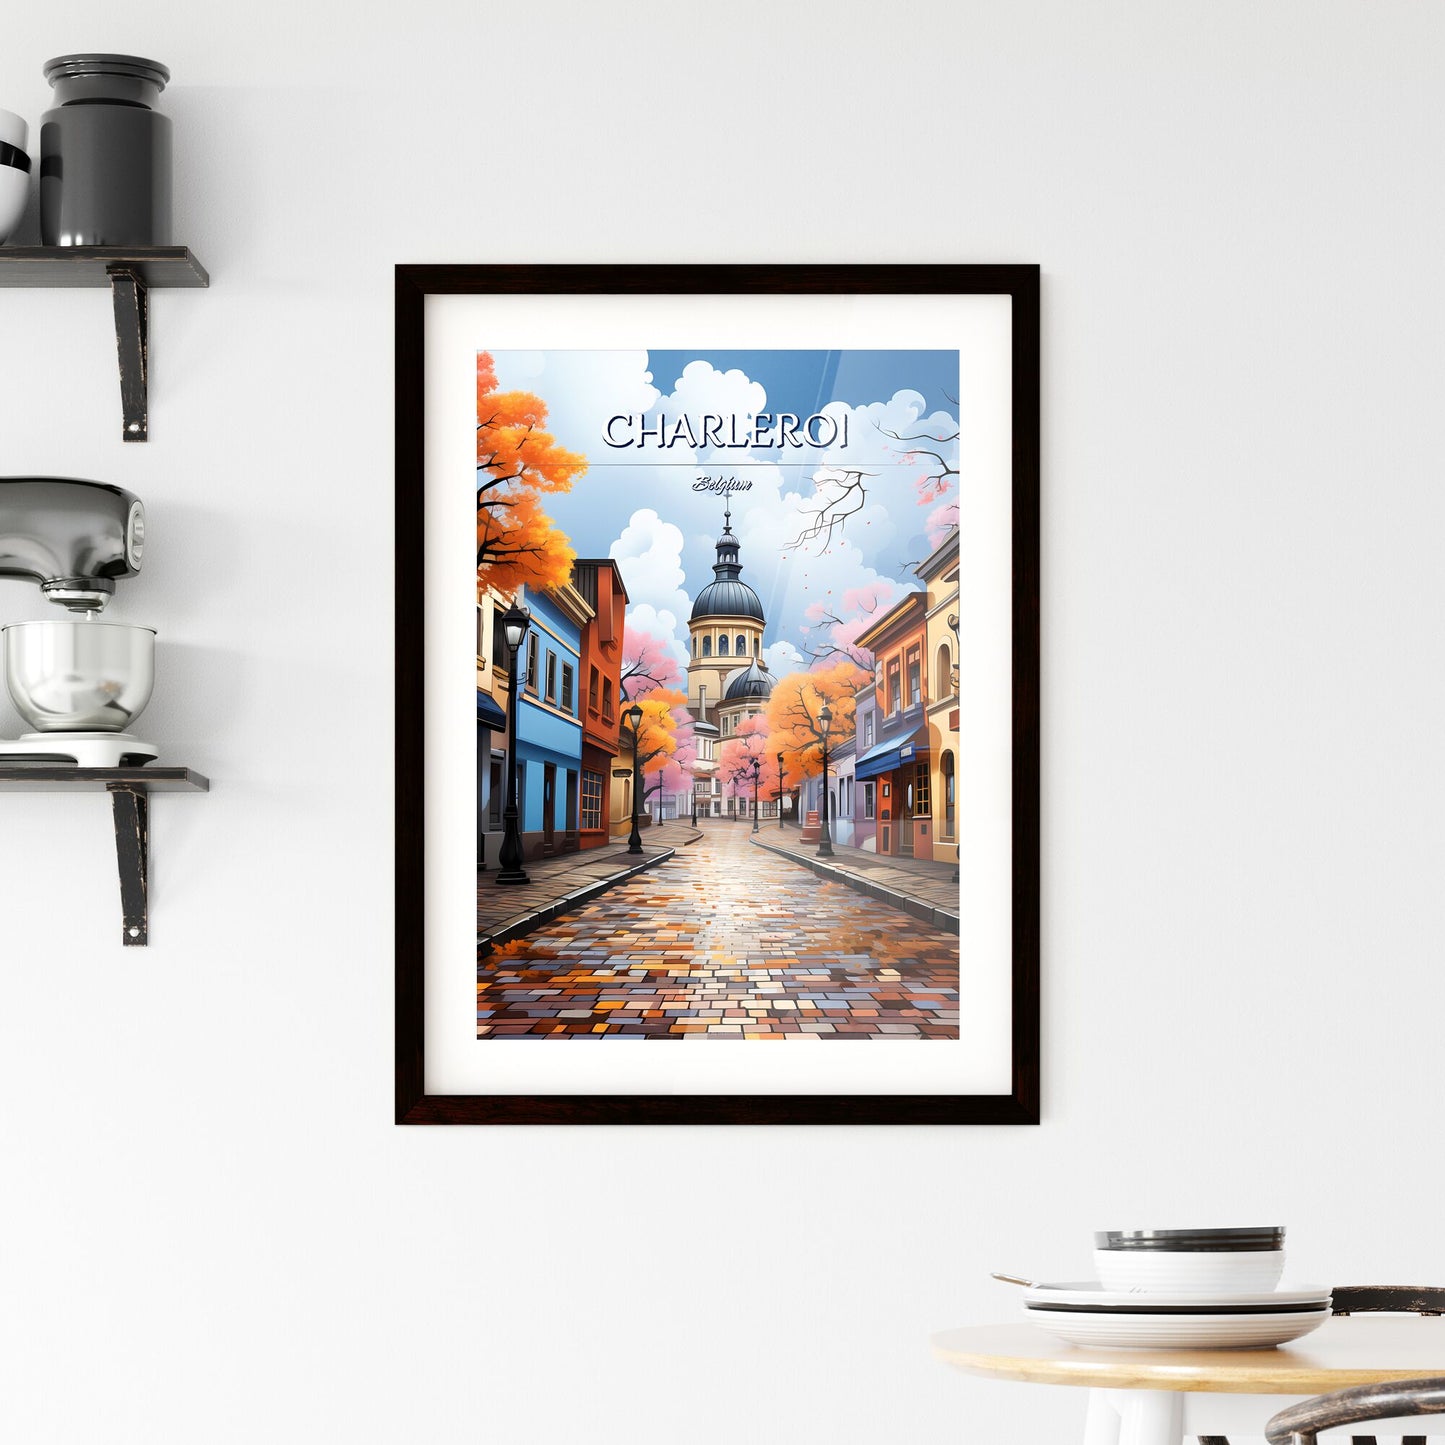 Charleroi, Belgium - Art print of a street with colorful buildings and trees Default Title